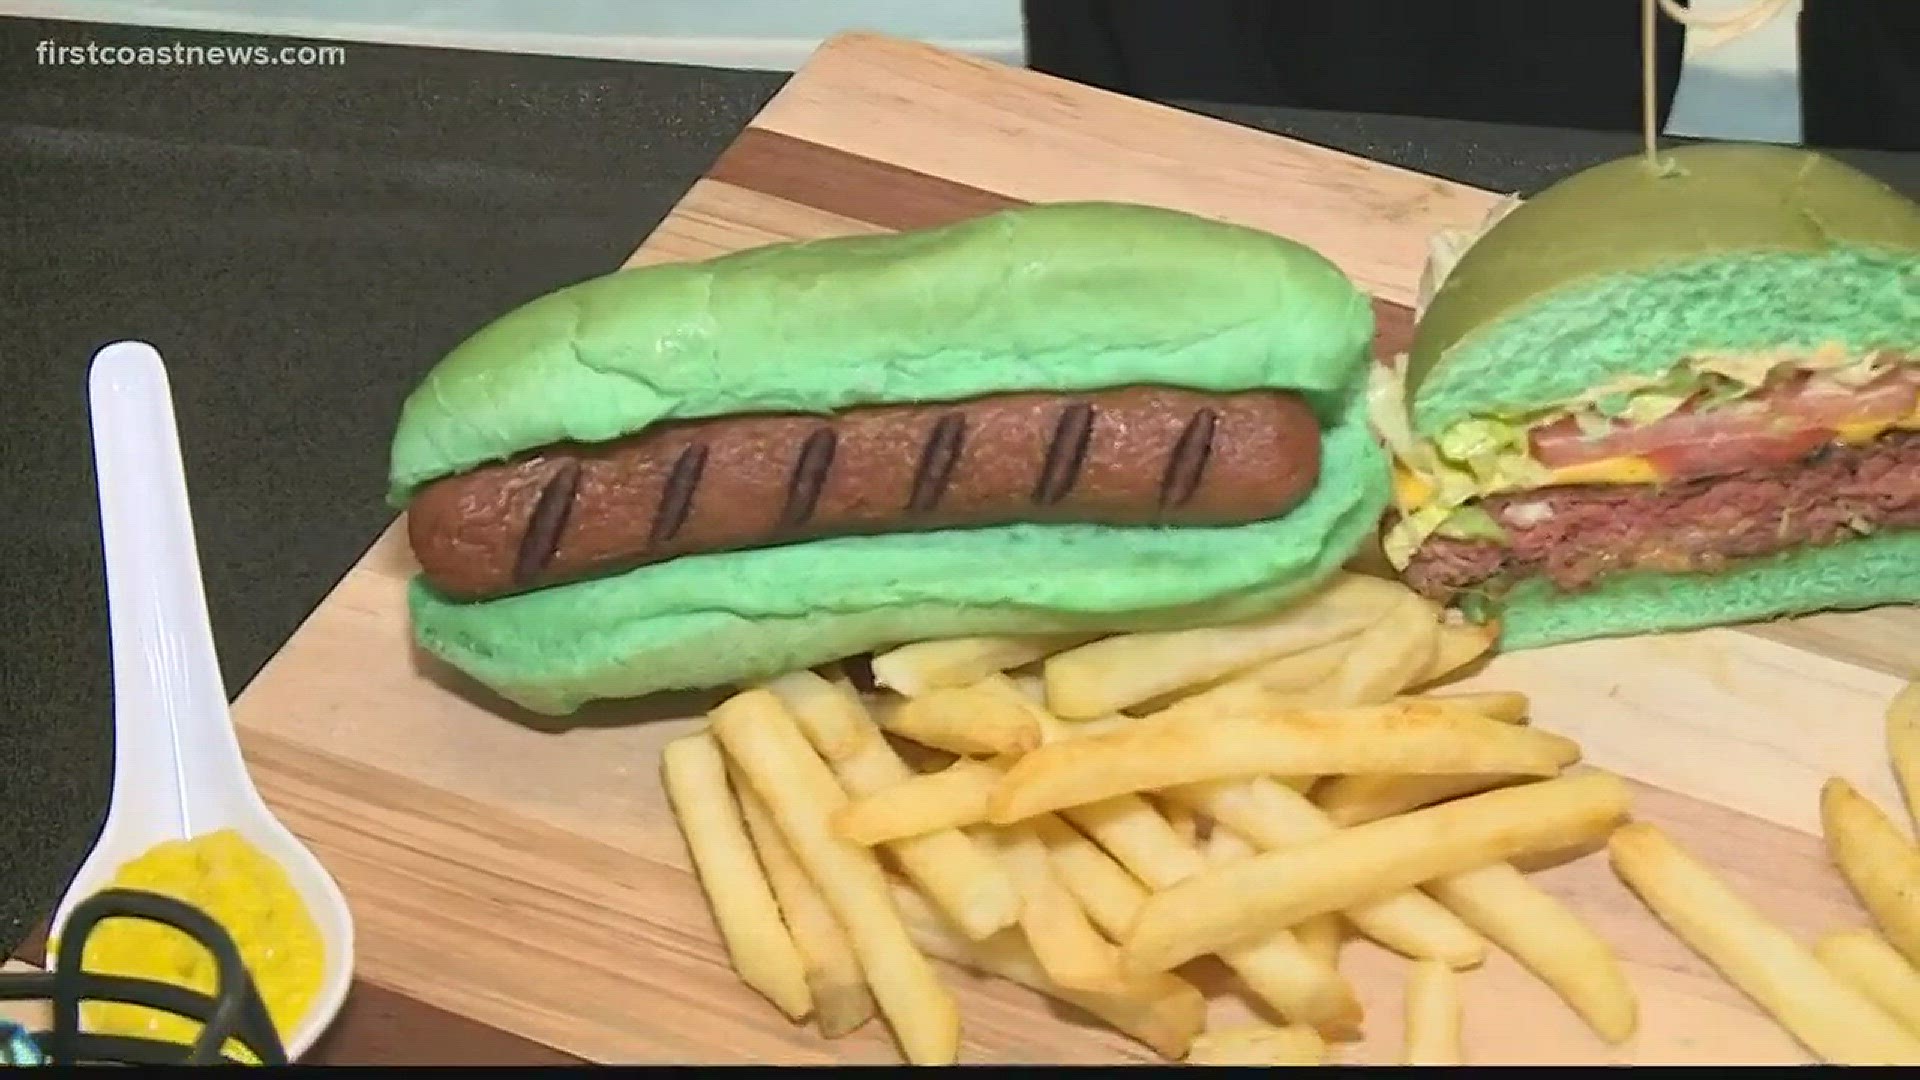 From burgers, hot dogs to desserts, several foods are going teal to show support for the Jacksonville Jaguars!